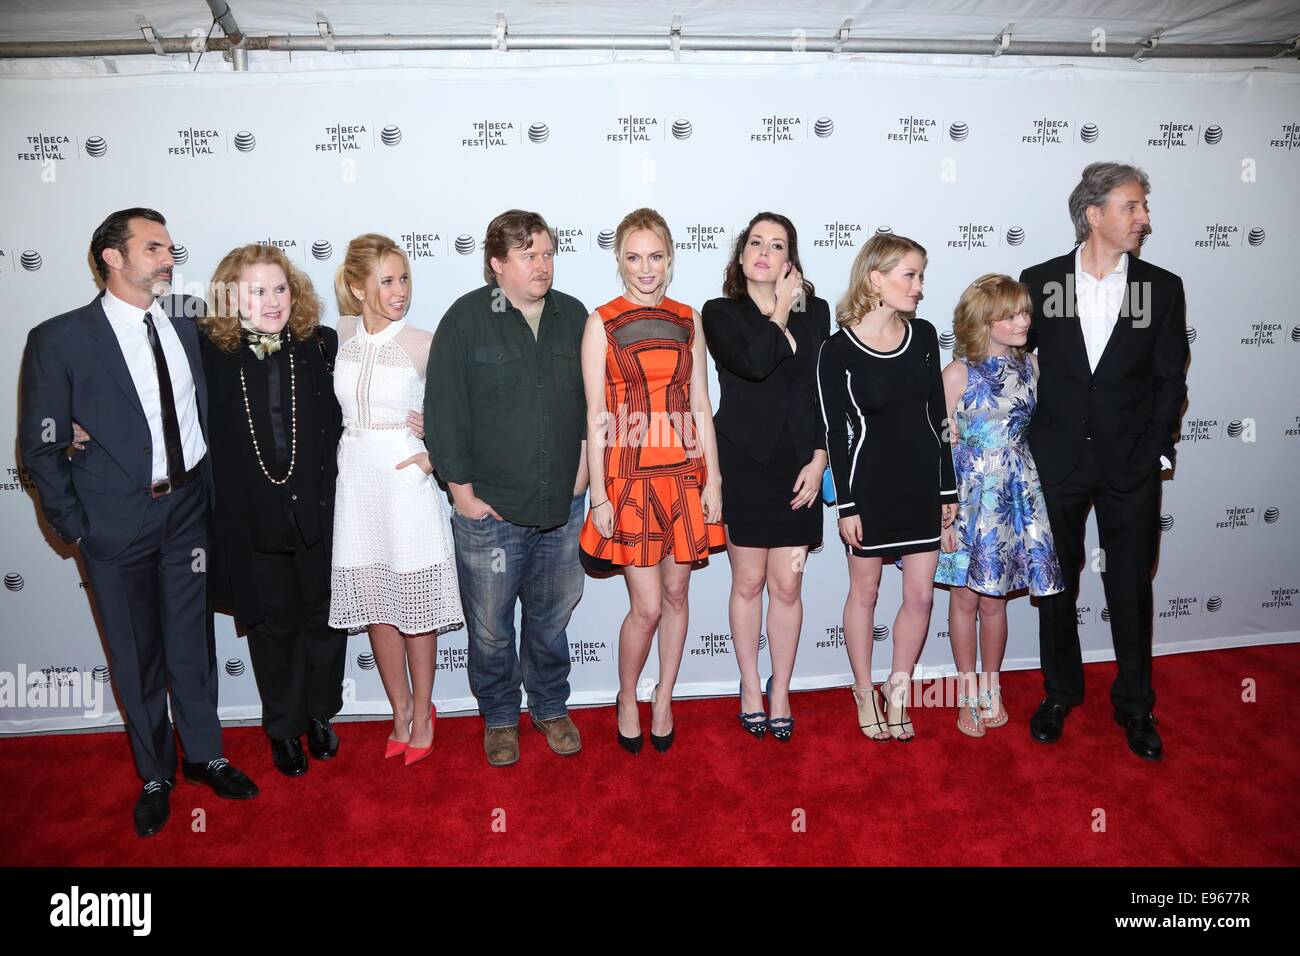 the 'Goodbye To All That' Premiere during the 2014 Tribeca Film Festival at the SVA Theater on April 17, 2014 in New York City.  Featuring: Paul Schneider,Celia Weston,Anna Camp,Michael Chernus,Heather Graham,Melanie Lynskey,Ashley Hinshaw,Audrey Scott,and Angus MacLachlan Where: New York, New York, United States When: 18 Apr 2014 Stock Photo